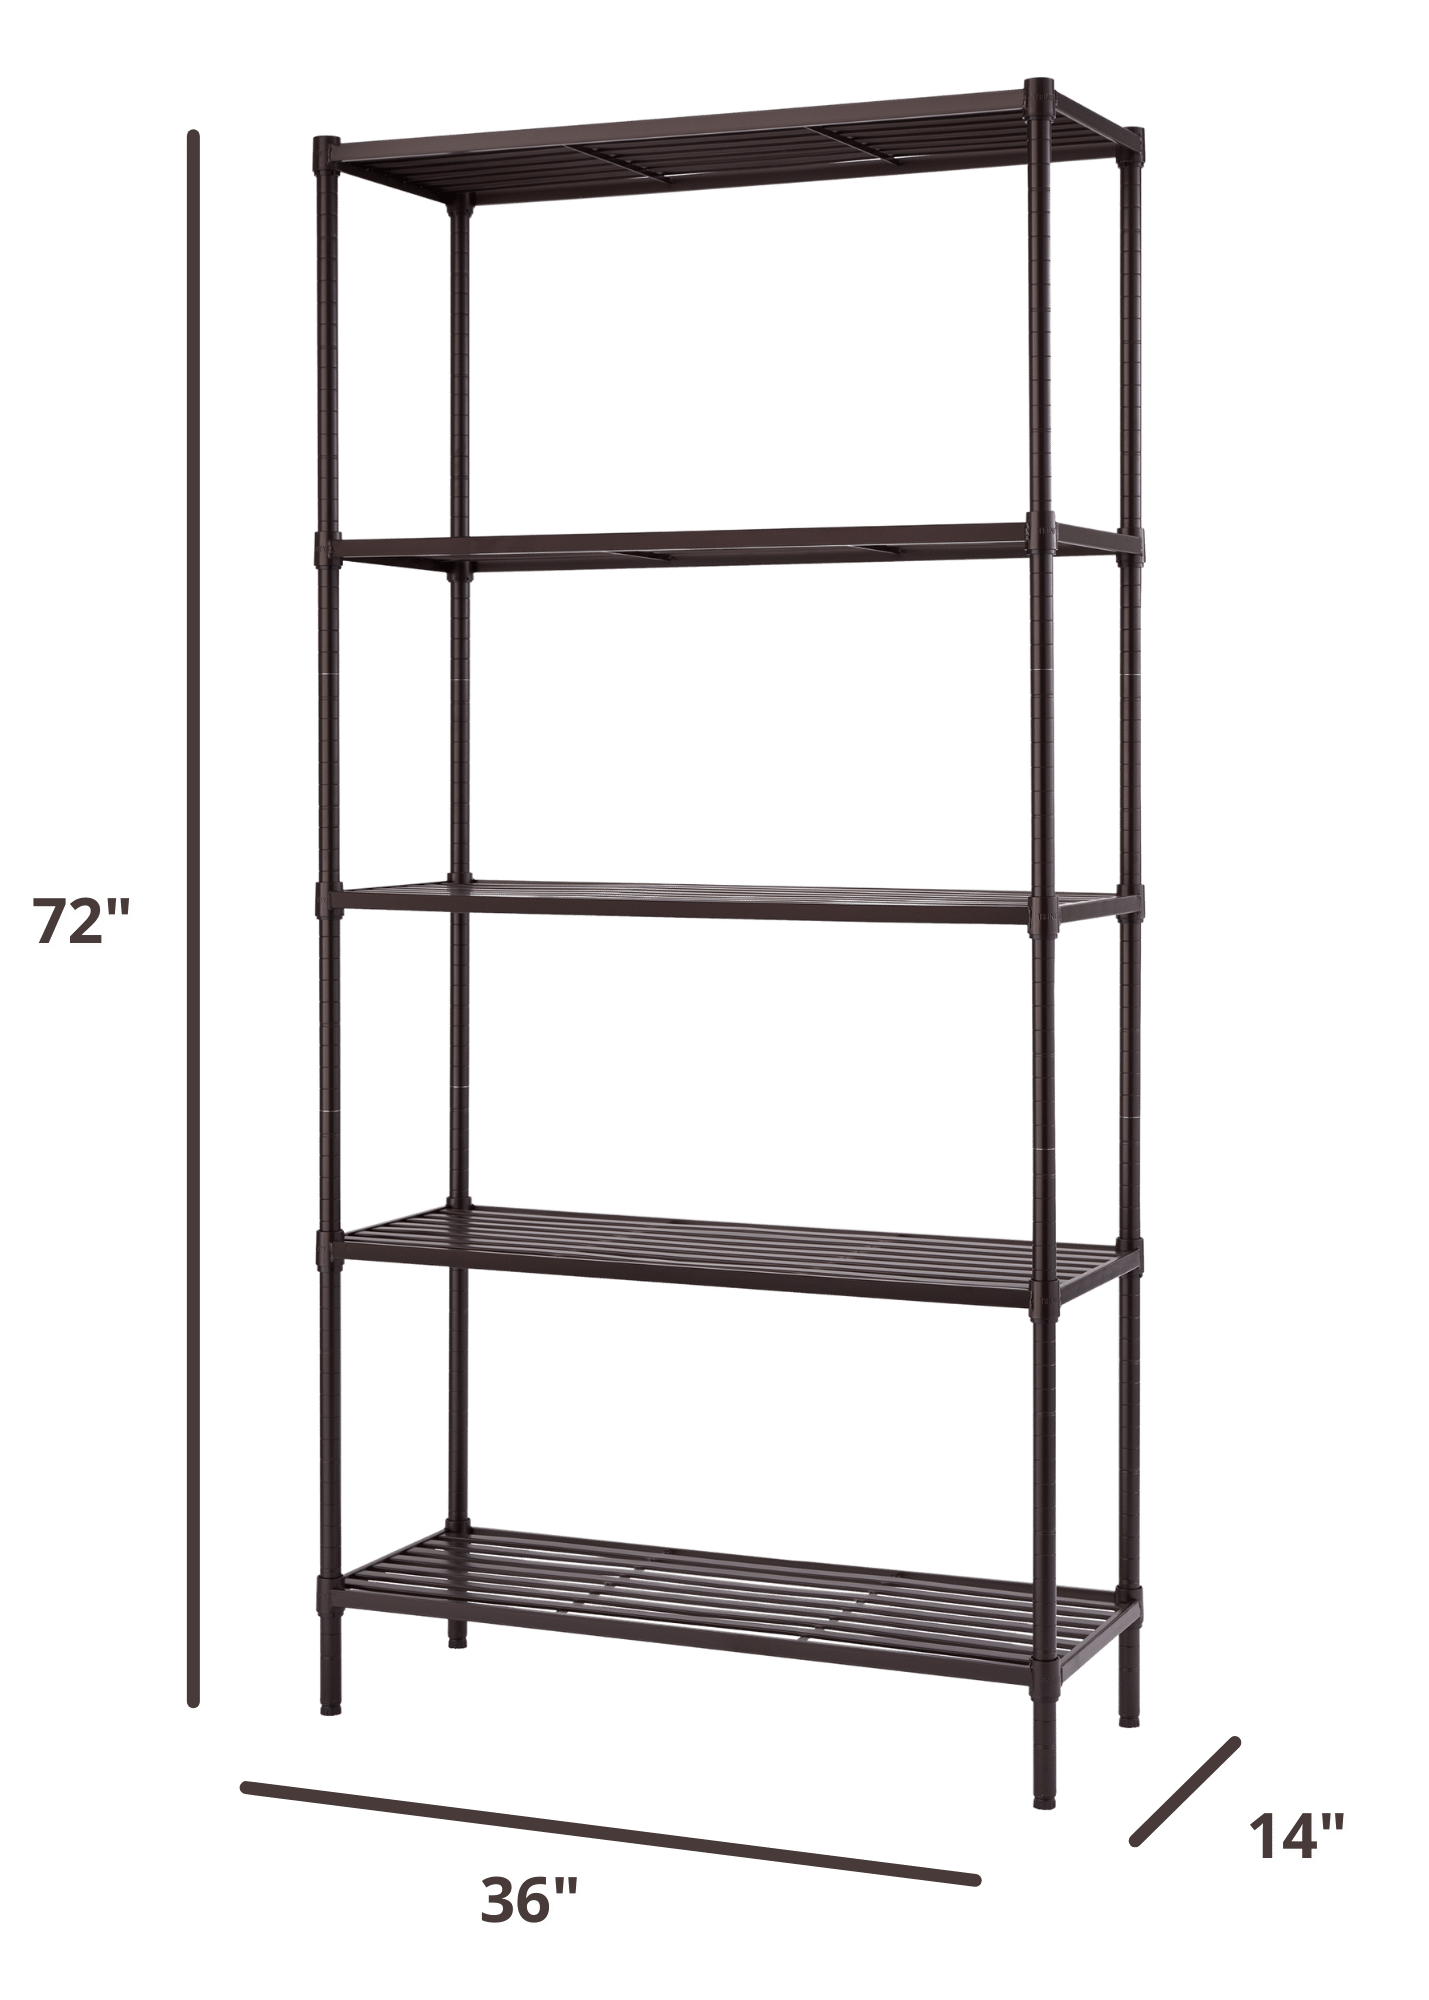 72 inches tall by 36 inches wide by 14 inches deep slat shelving rack with 5 shelves